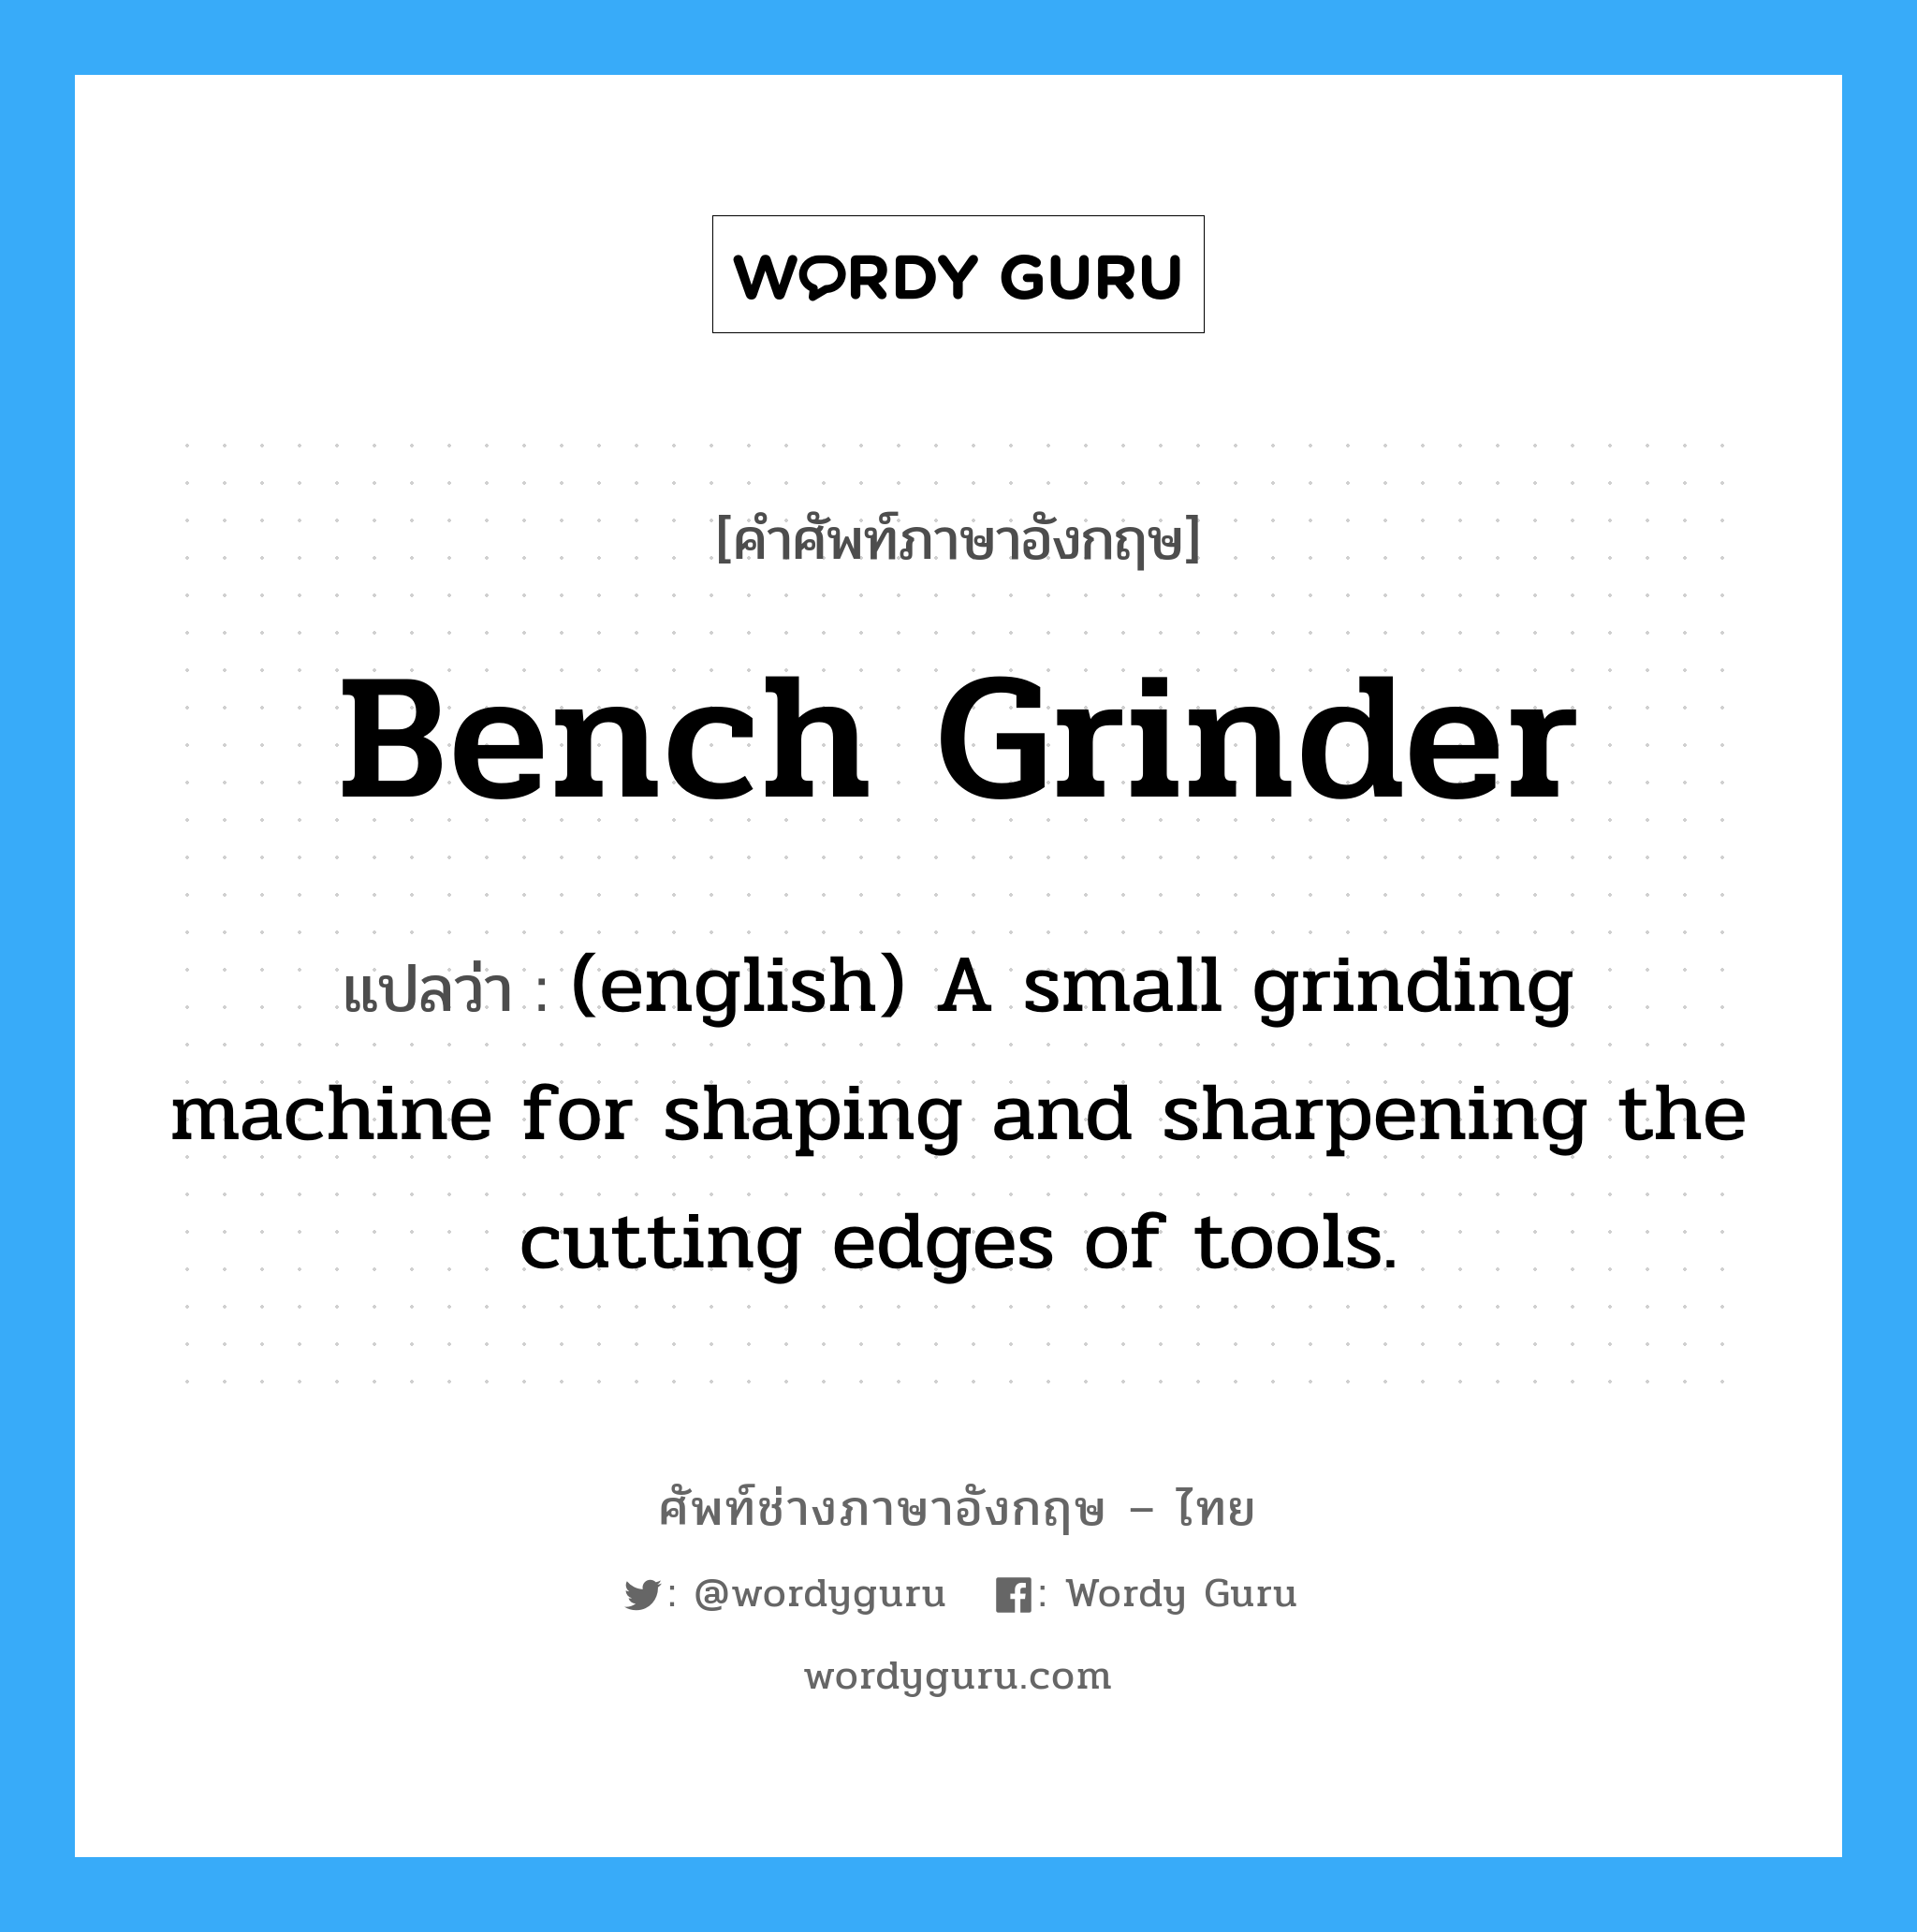 (english) A small grinding machine for shaping and sharpening the cutting edges of tools. ภาษาอังกฤษ?, คำศัพท์ช่างภาษาอังกฤษ - ไทย (english) A small grinding machine for shaping and sharpening the cutting edges of tools. คำศัพท์ภาษาอังกฤษ (english) A small grinding machine for shaping and sharpening the cutting edges of tools. แปลว่า Bench Grinder